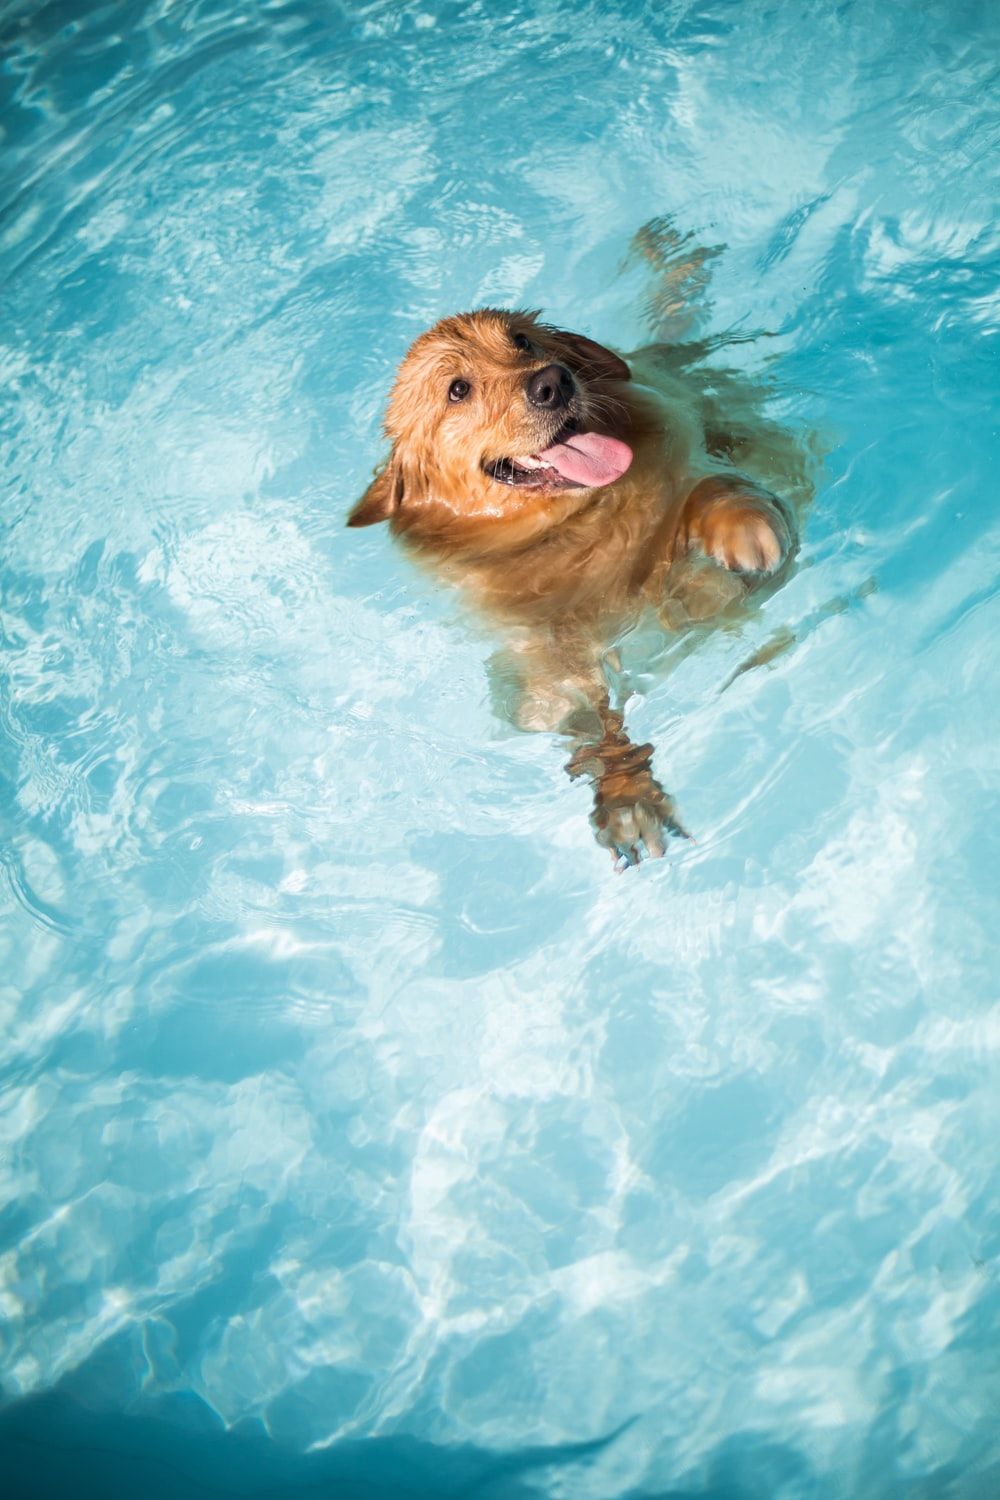 Dog In Pool Picture. Download Free Image